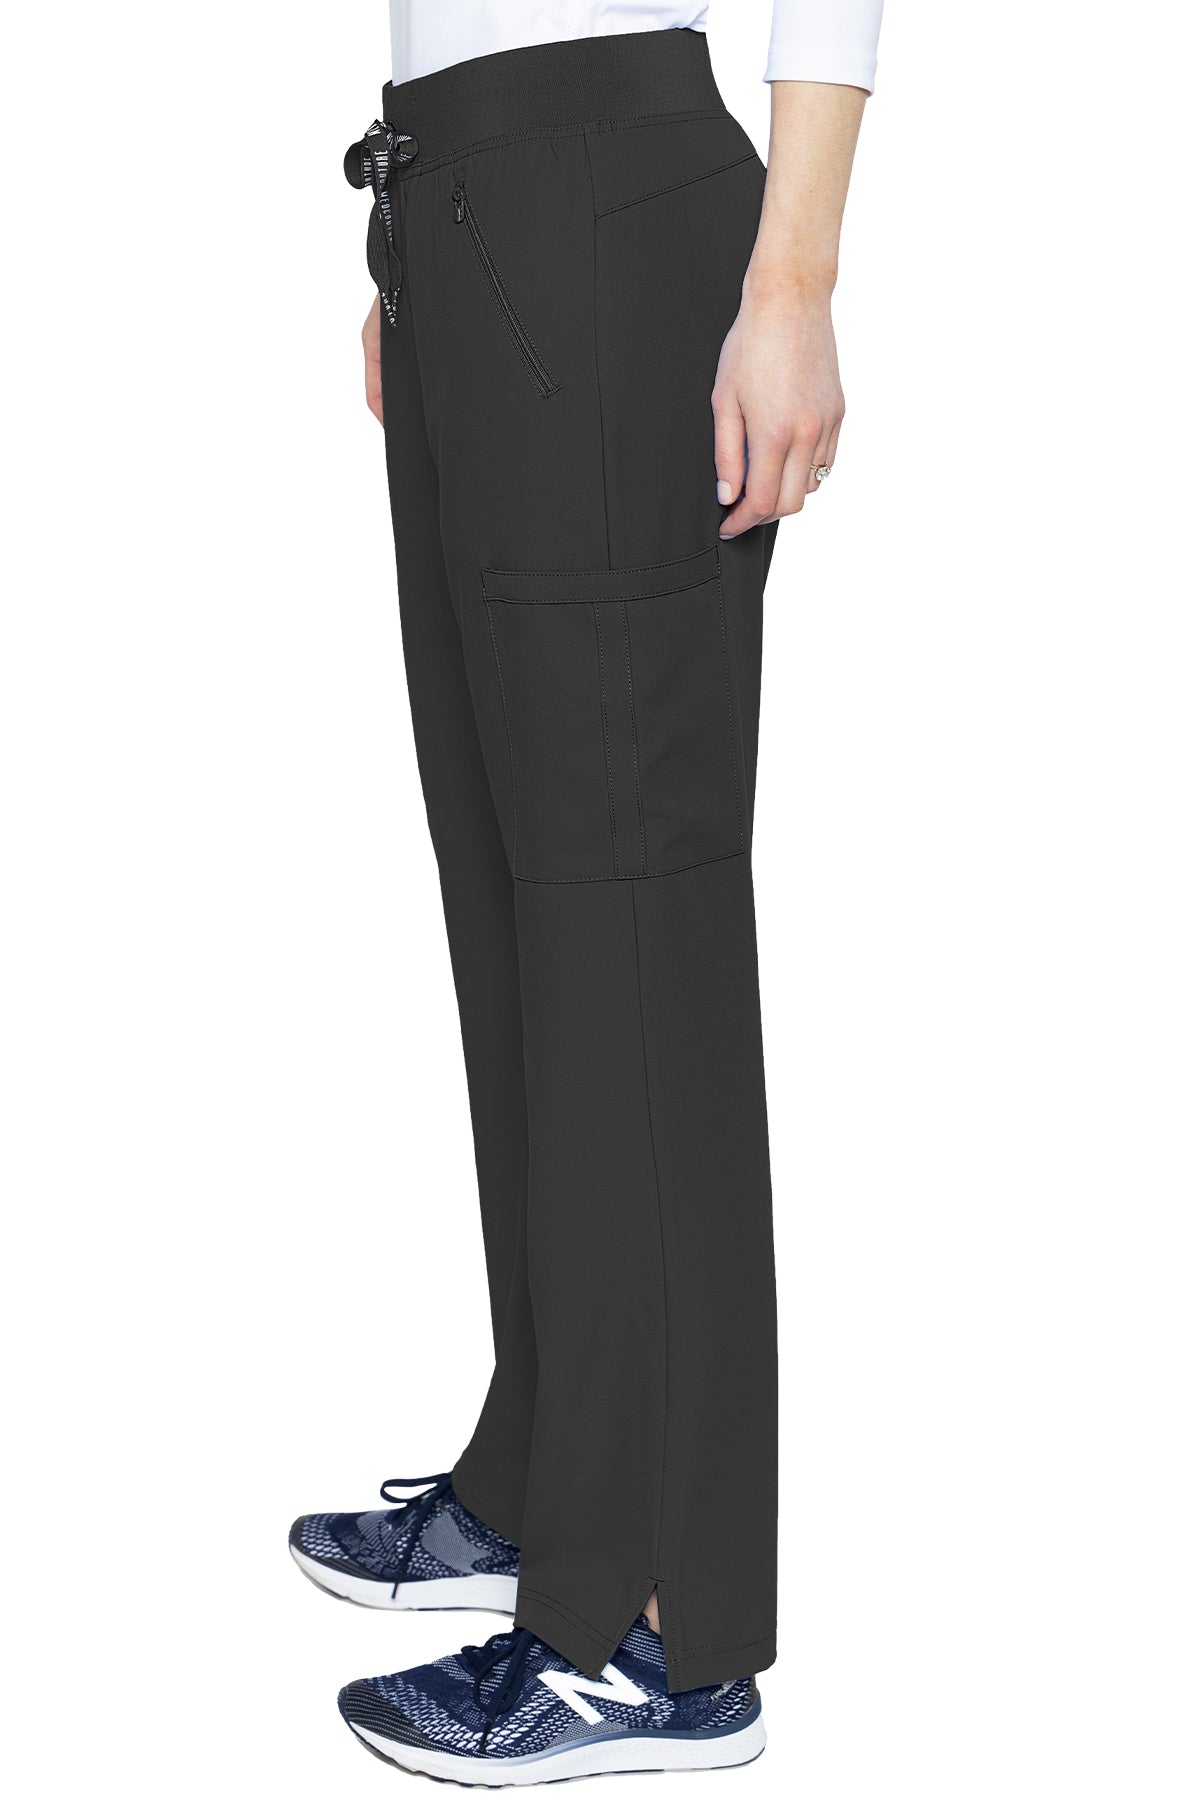 Zipper Pant Lightweight by Med Couture (Tall) XS-5XL / Black